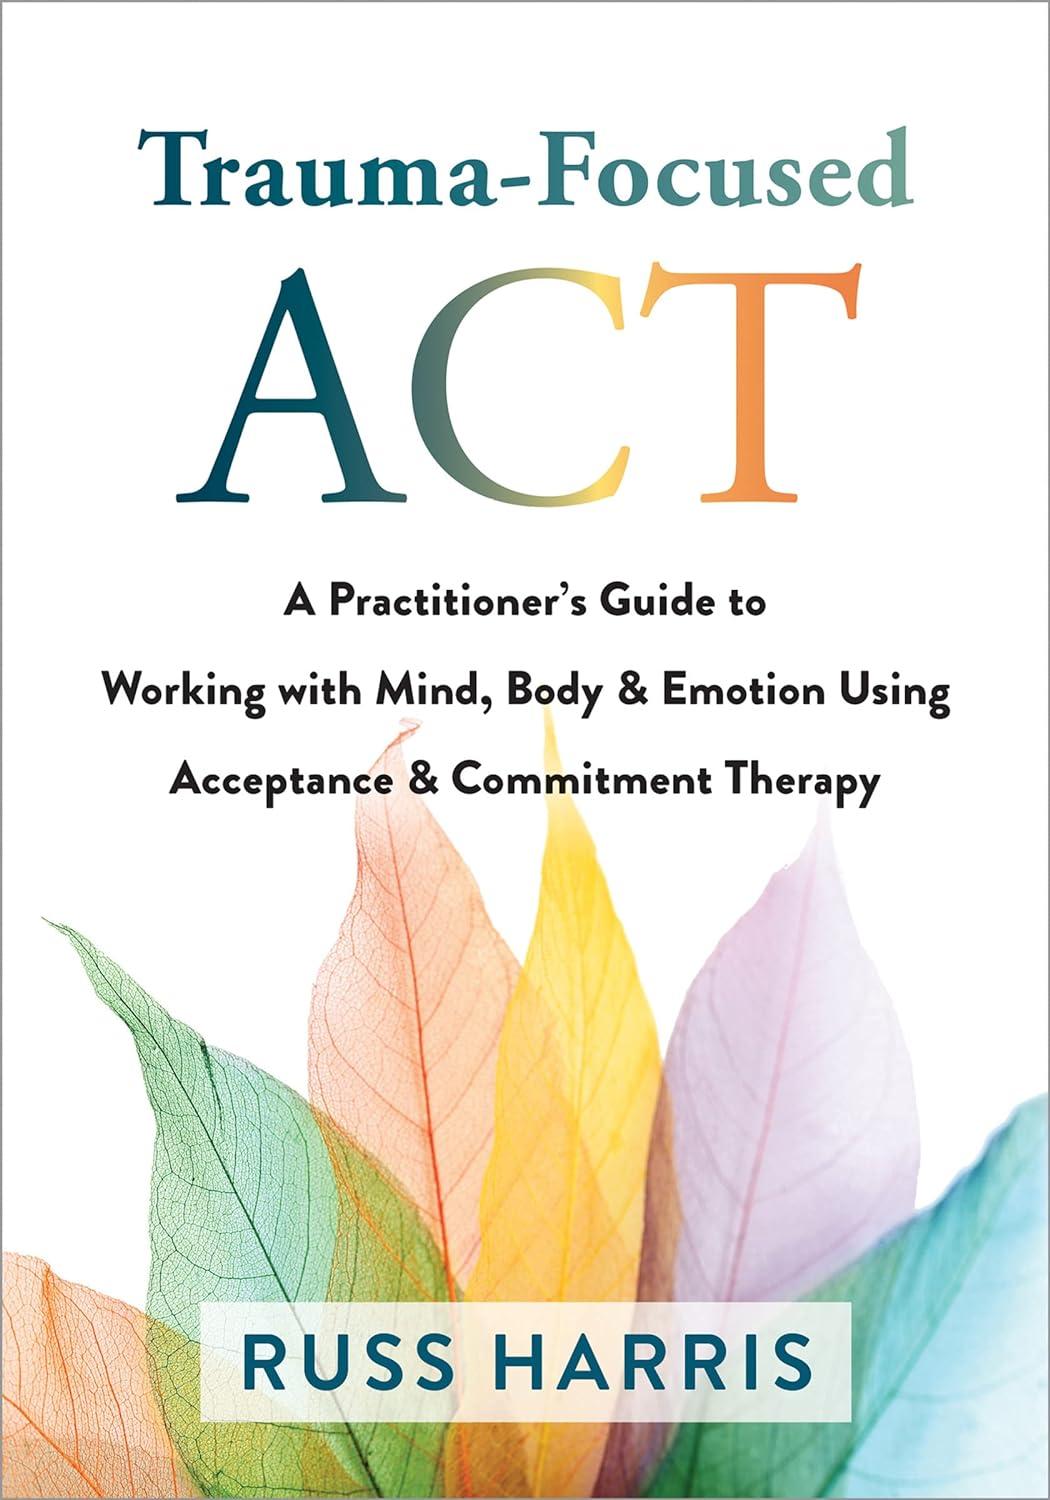 trauma focused act a practitioner’s guide to working with mind body and emotion using acceptance and